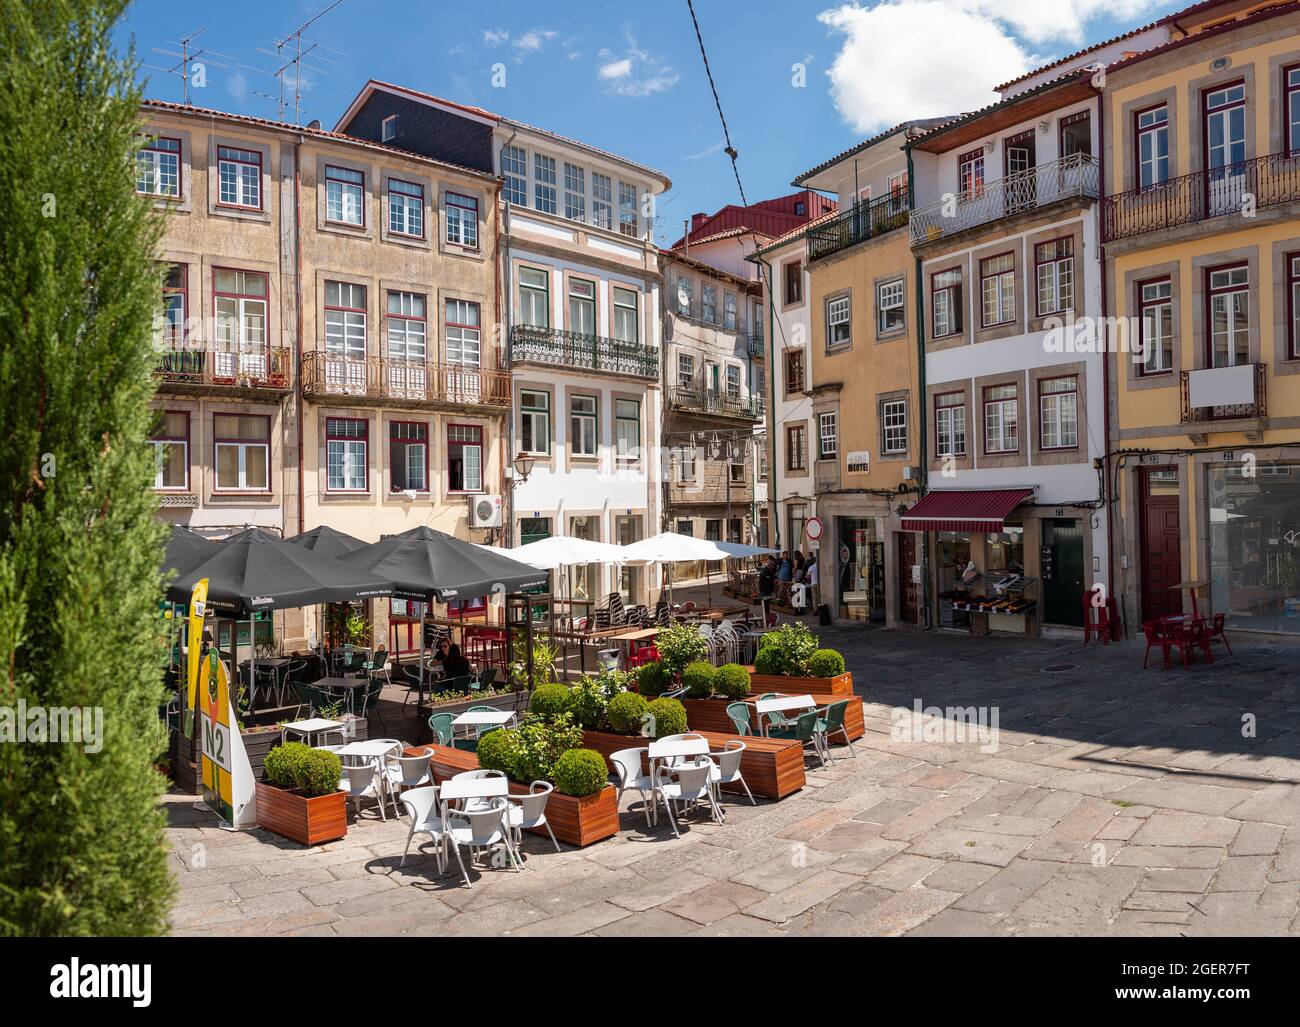 Viseu, Portugal - July 31, 2021: Largo Pintor Gata, square located in the old part of the city. Stock Photo